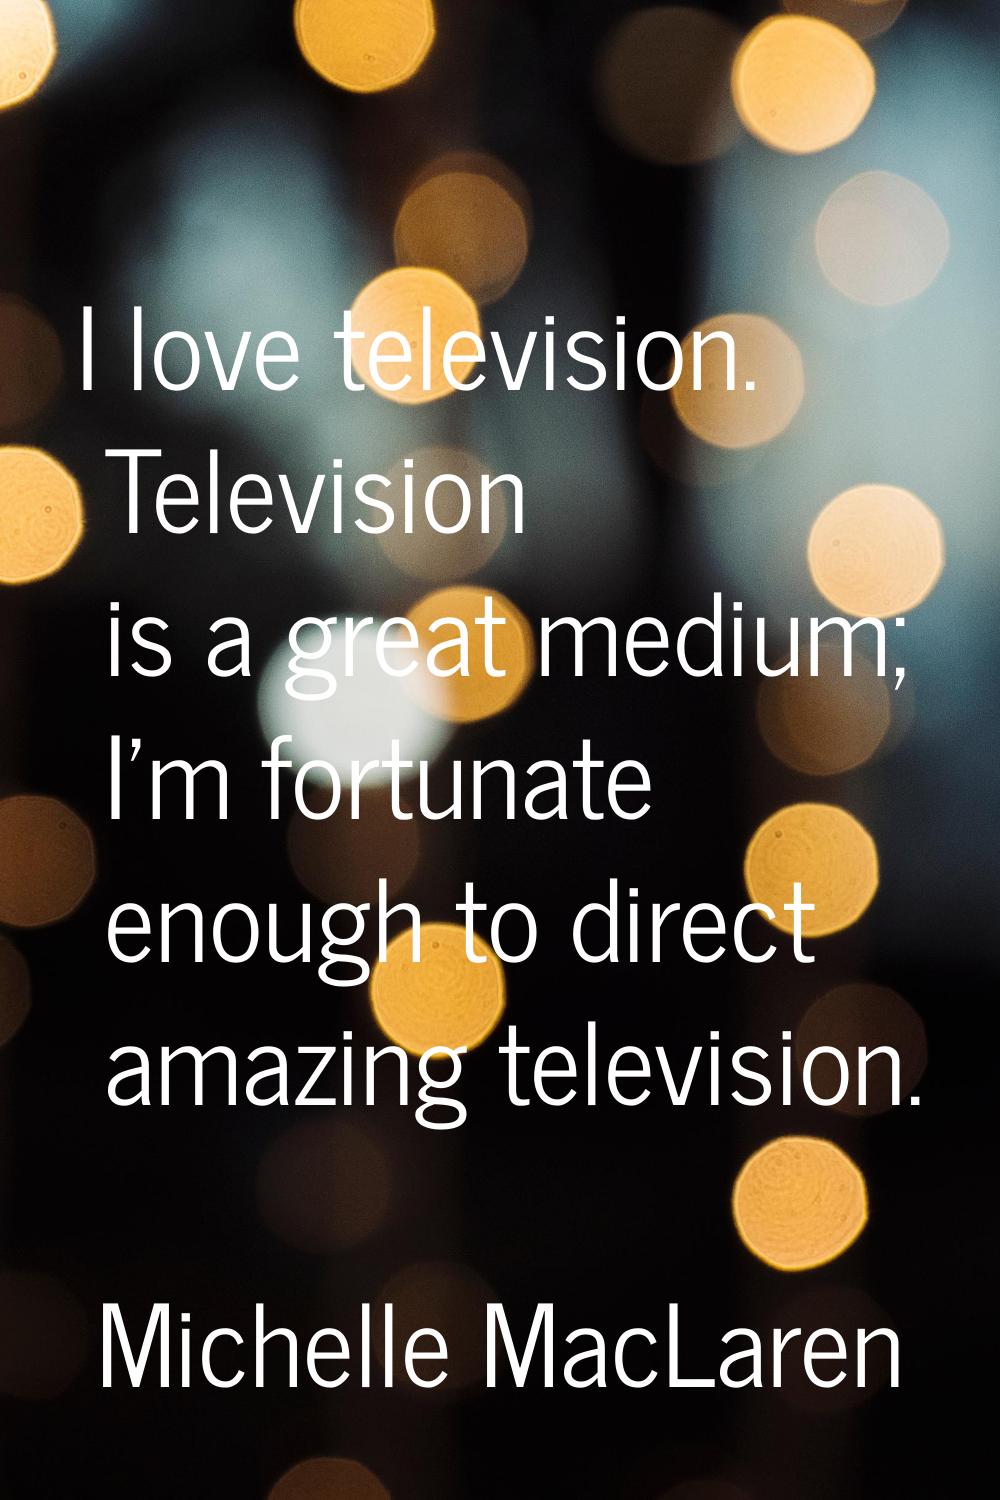 I love television. Television is a great medium; I'm fortunate enough to direct amazing television.